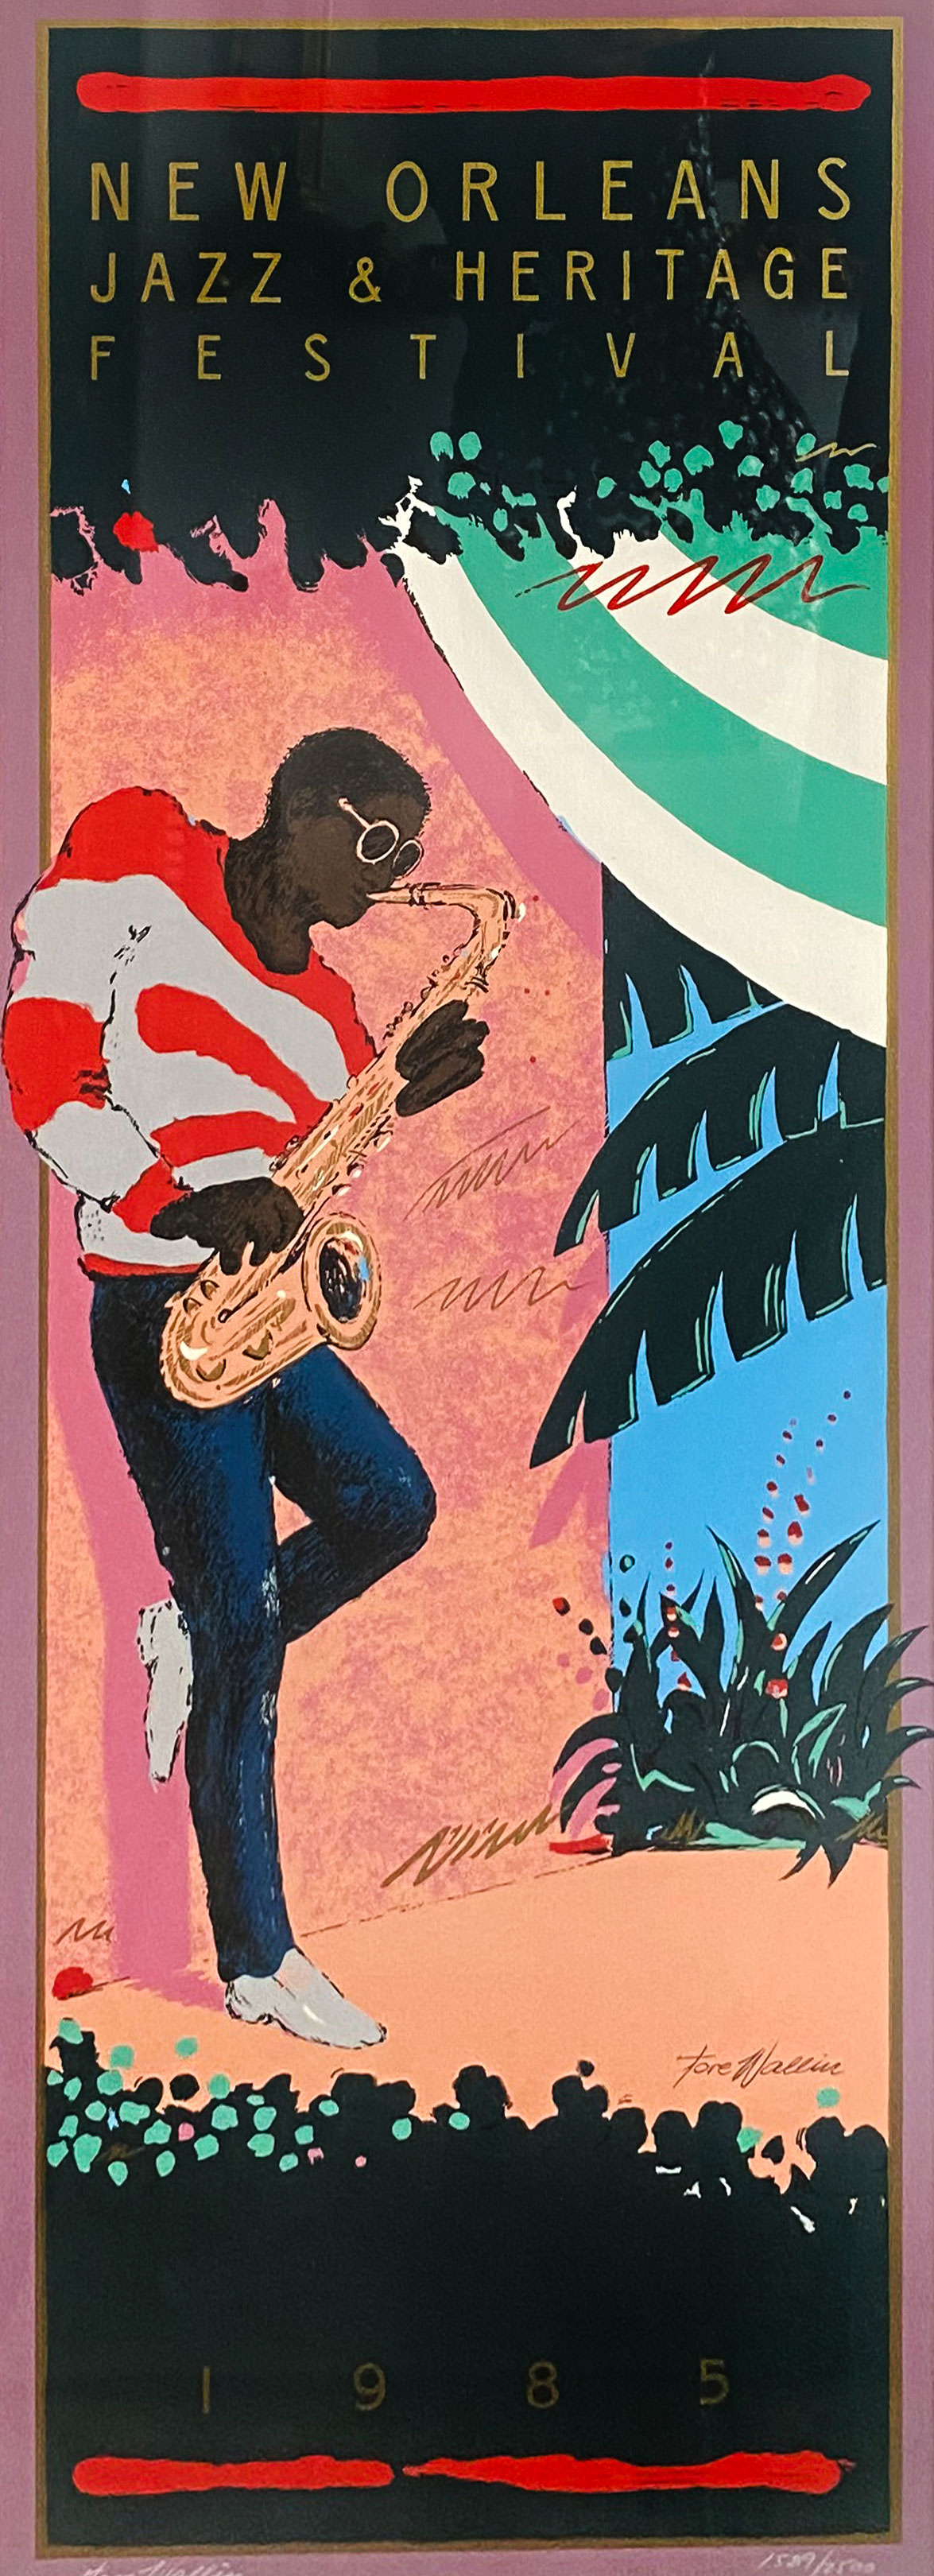 JAZZ POSTER 1985 NEW ORLEANS POSTER 27396b